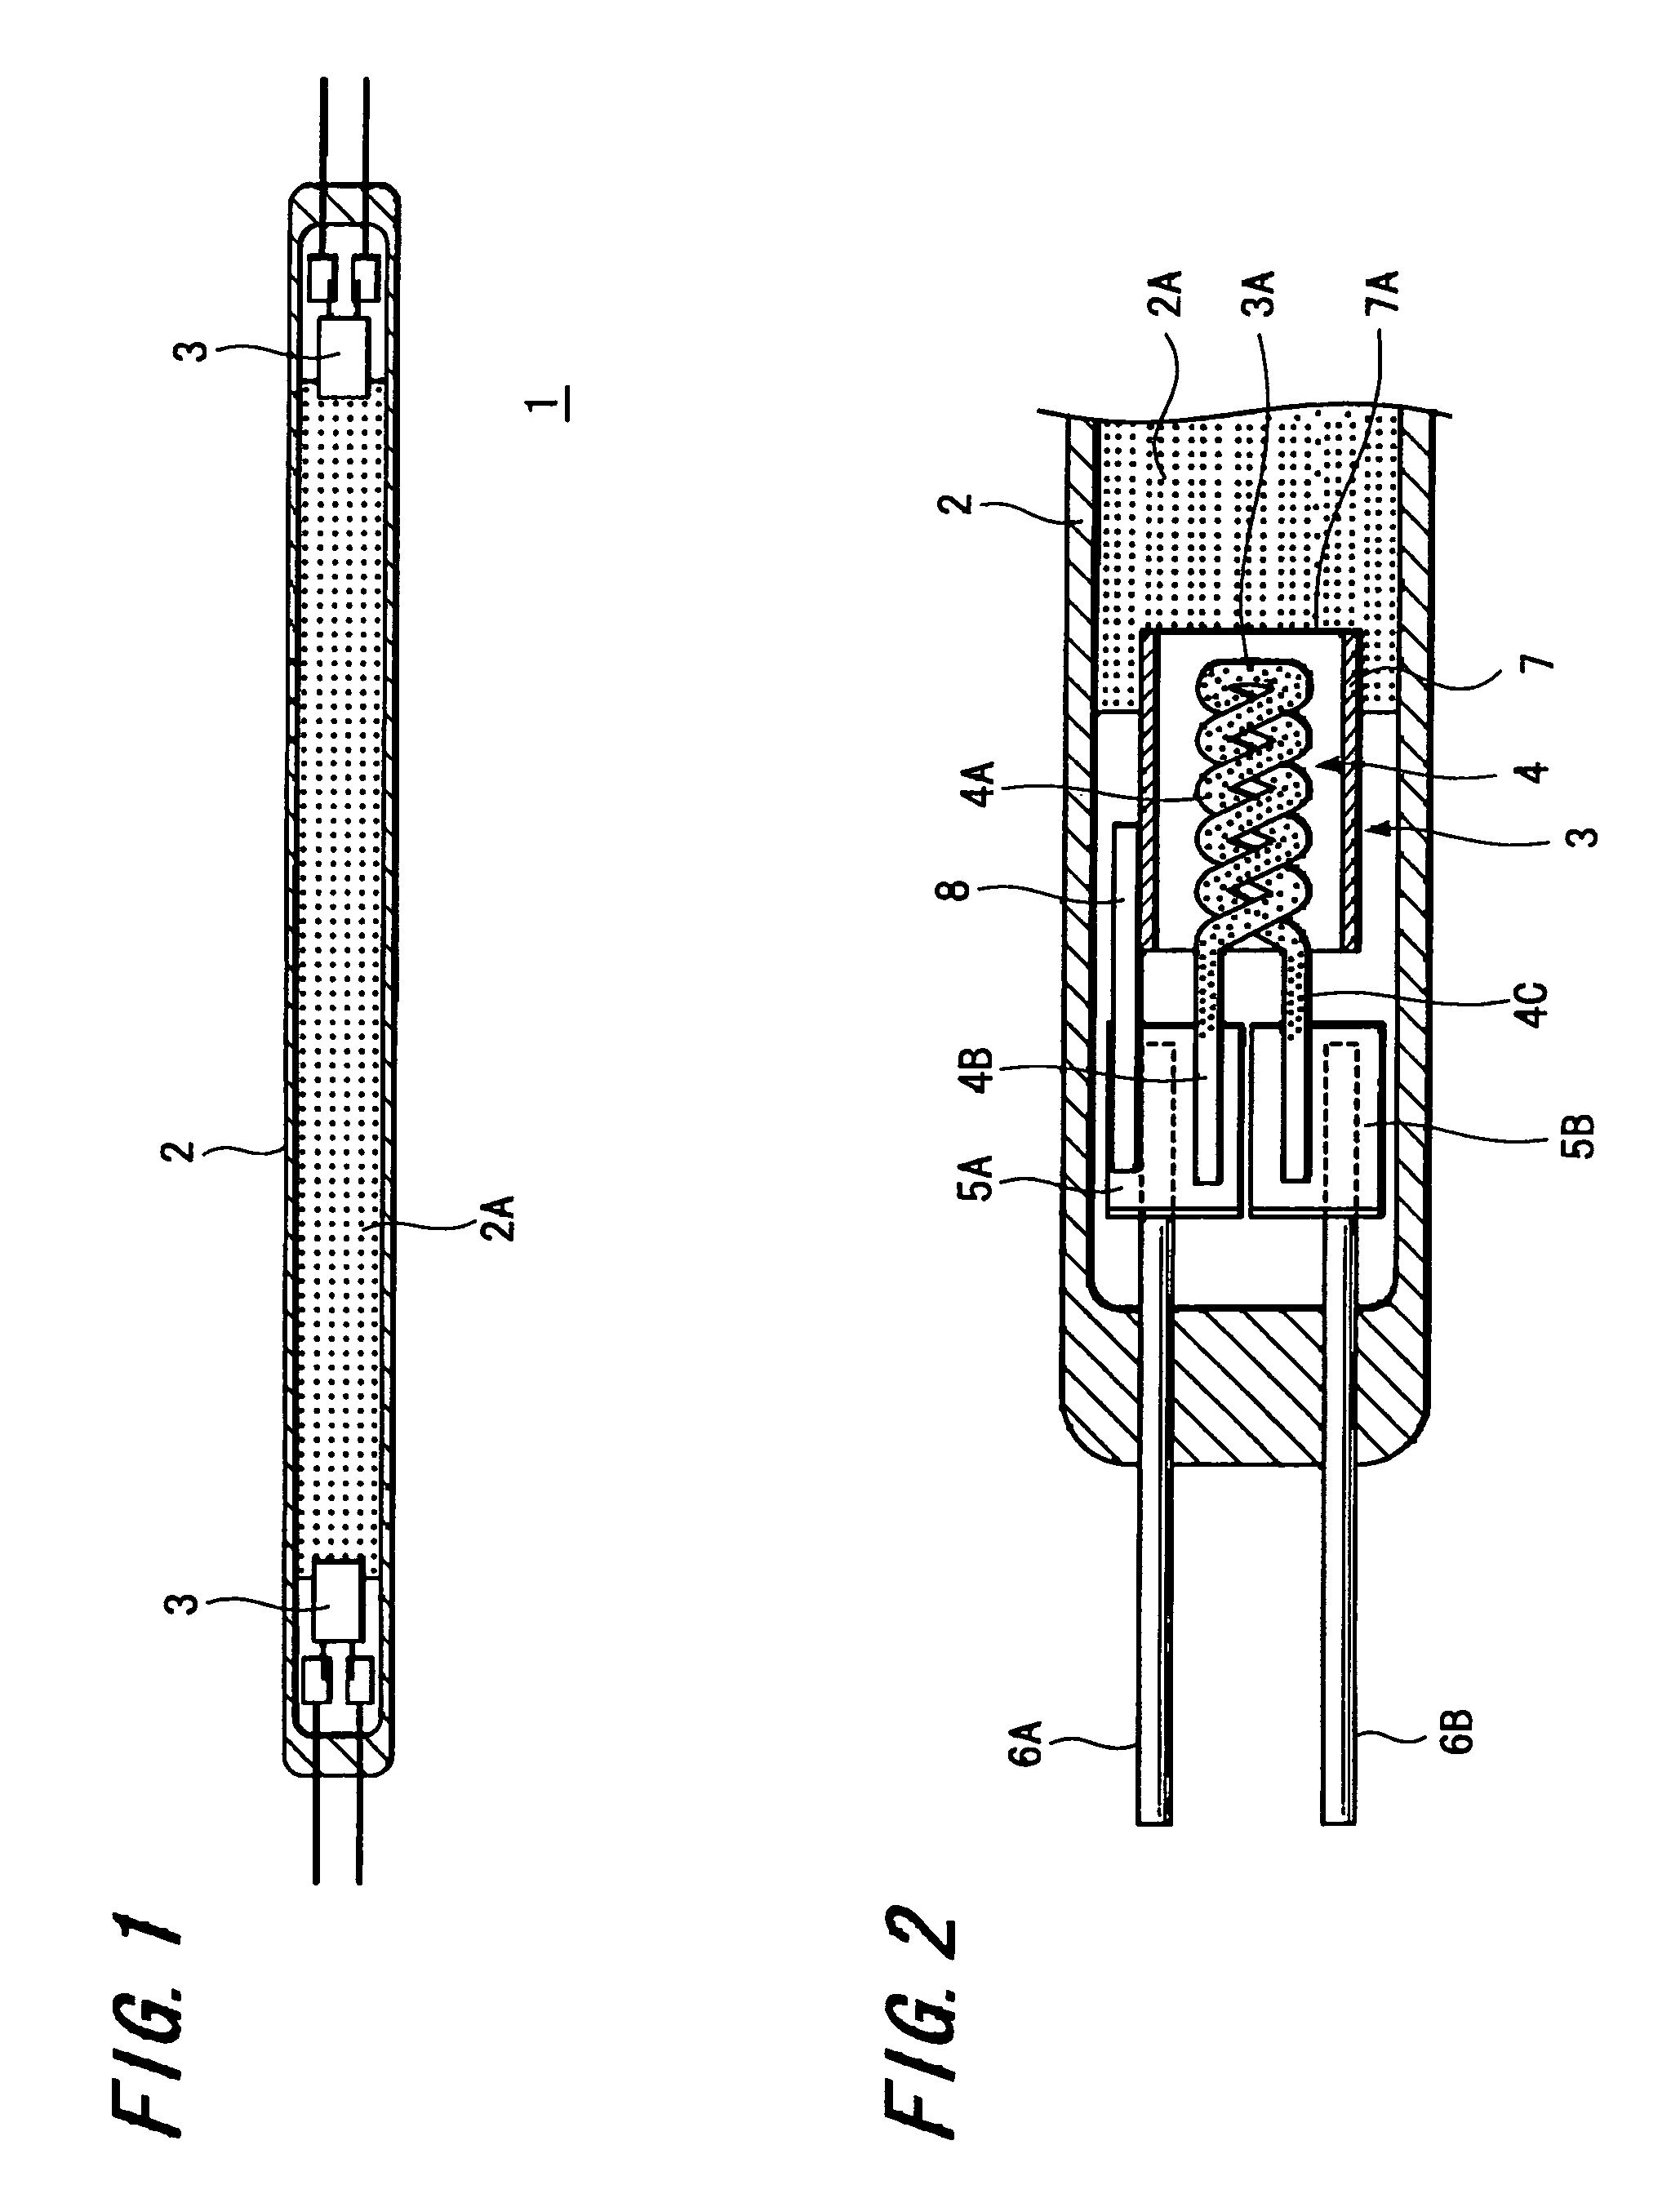 Discharge lamp and illumination apparatus with gas fill